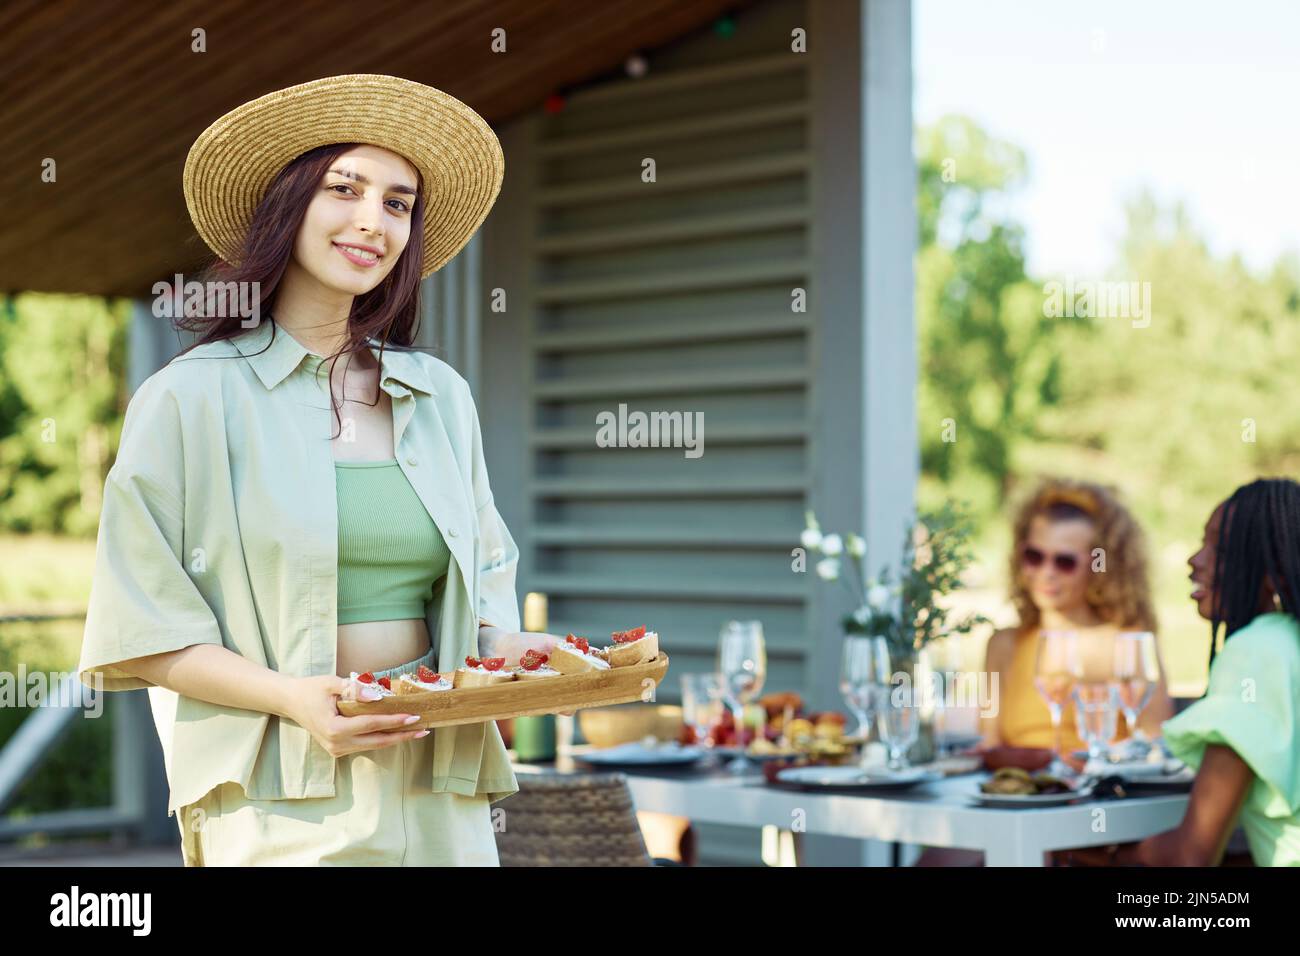 Waist up portrait of young woman holding tray of snacks looking at camera while enjoying outdoor party with friends in Summer, copy space Stock Photo